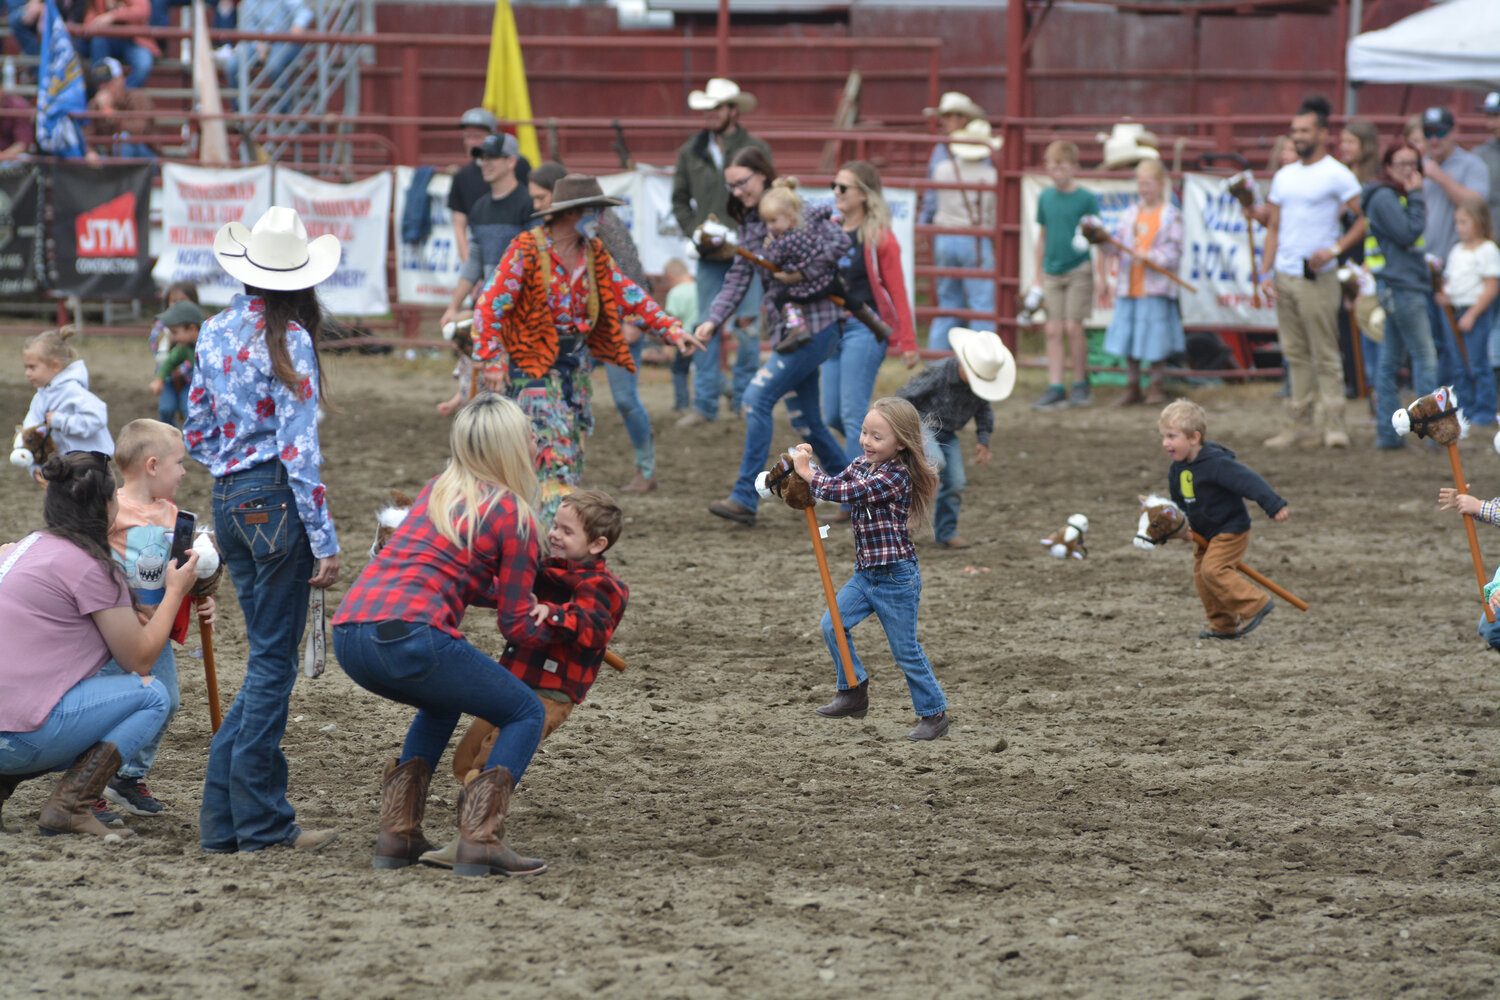 Rodeo youngsters compete in the annual “Sunday stick-horse race” at the Roy Rodeo on Sept. 3.